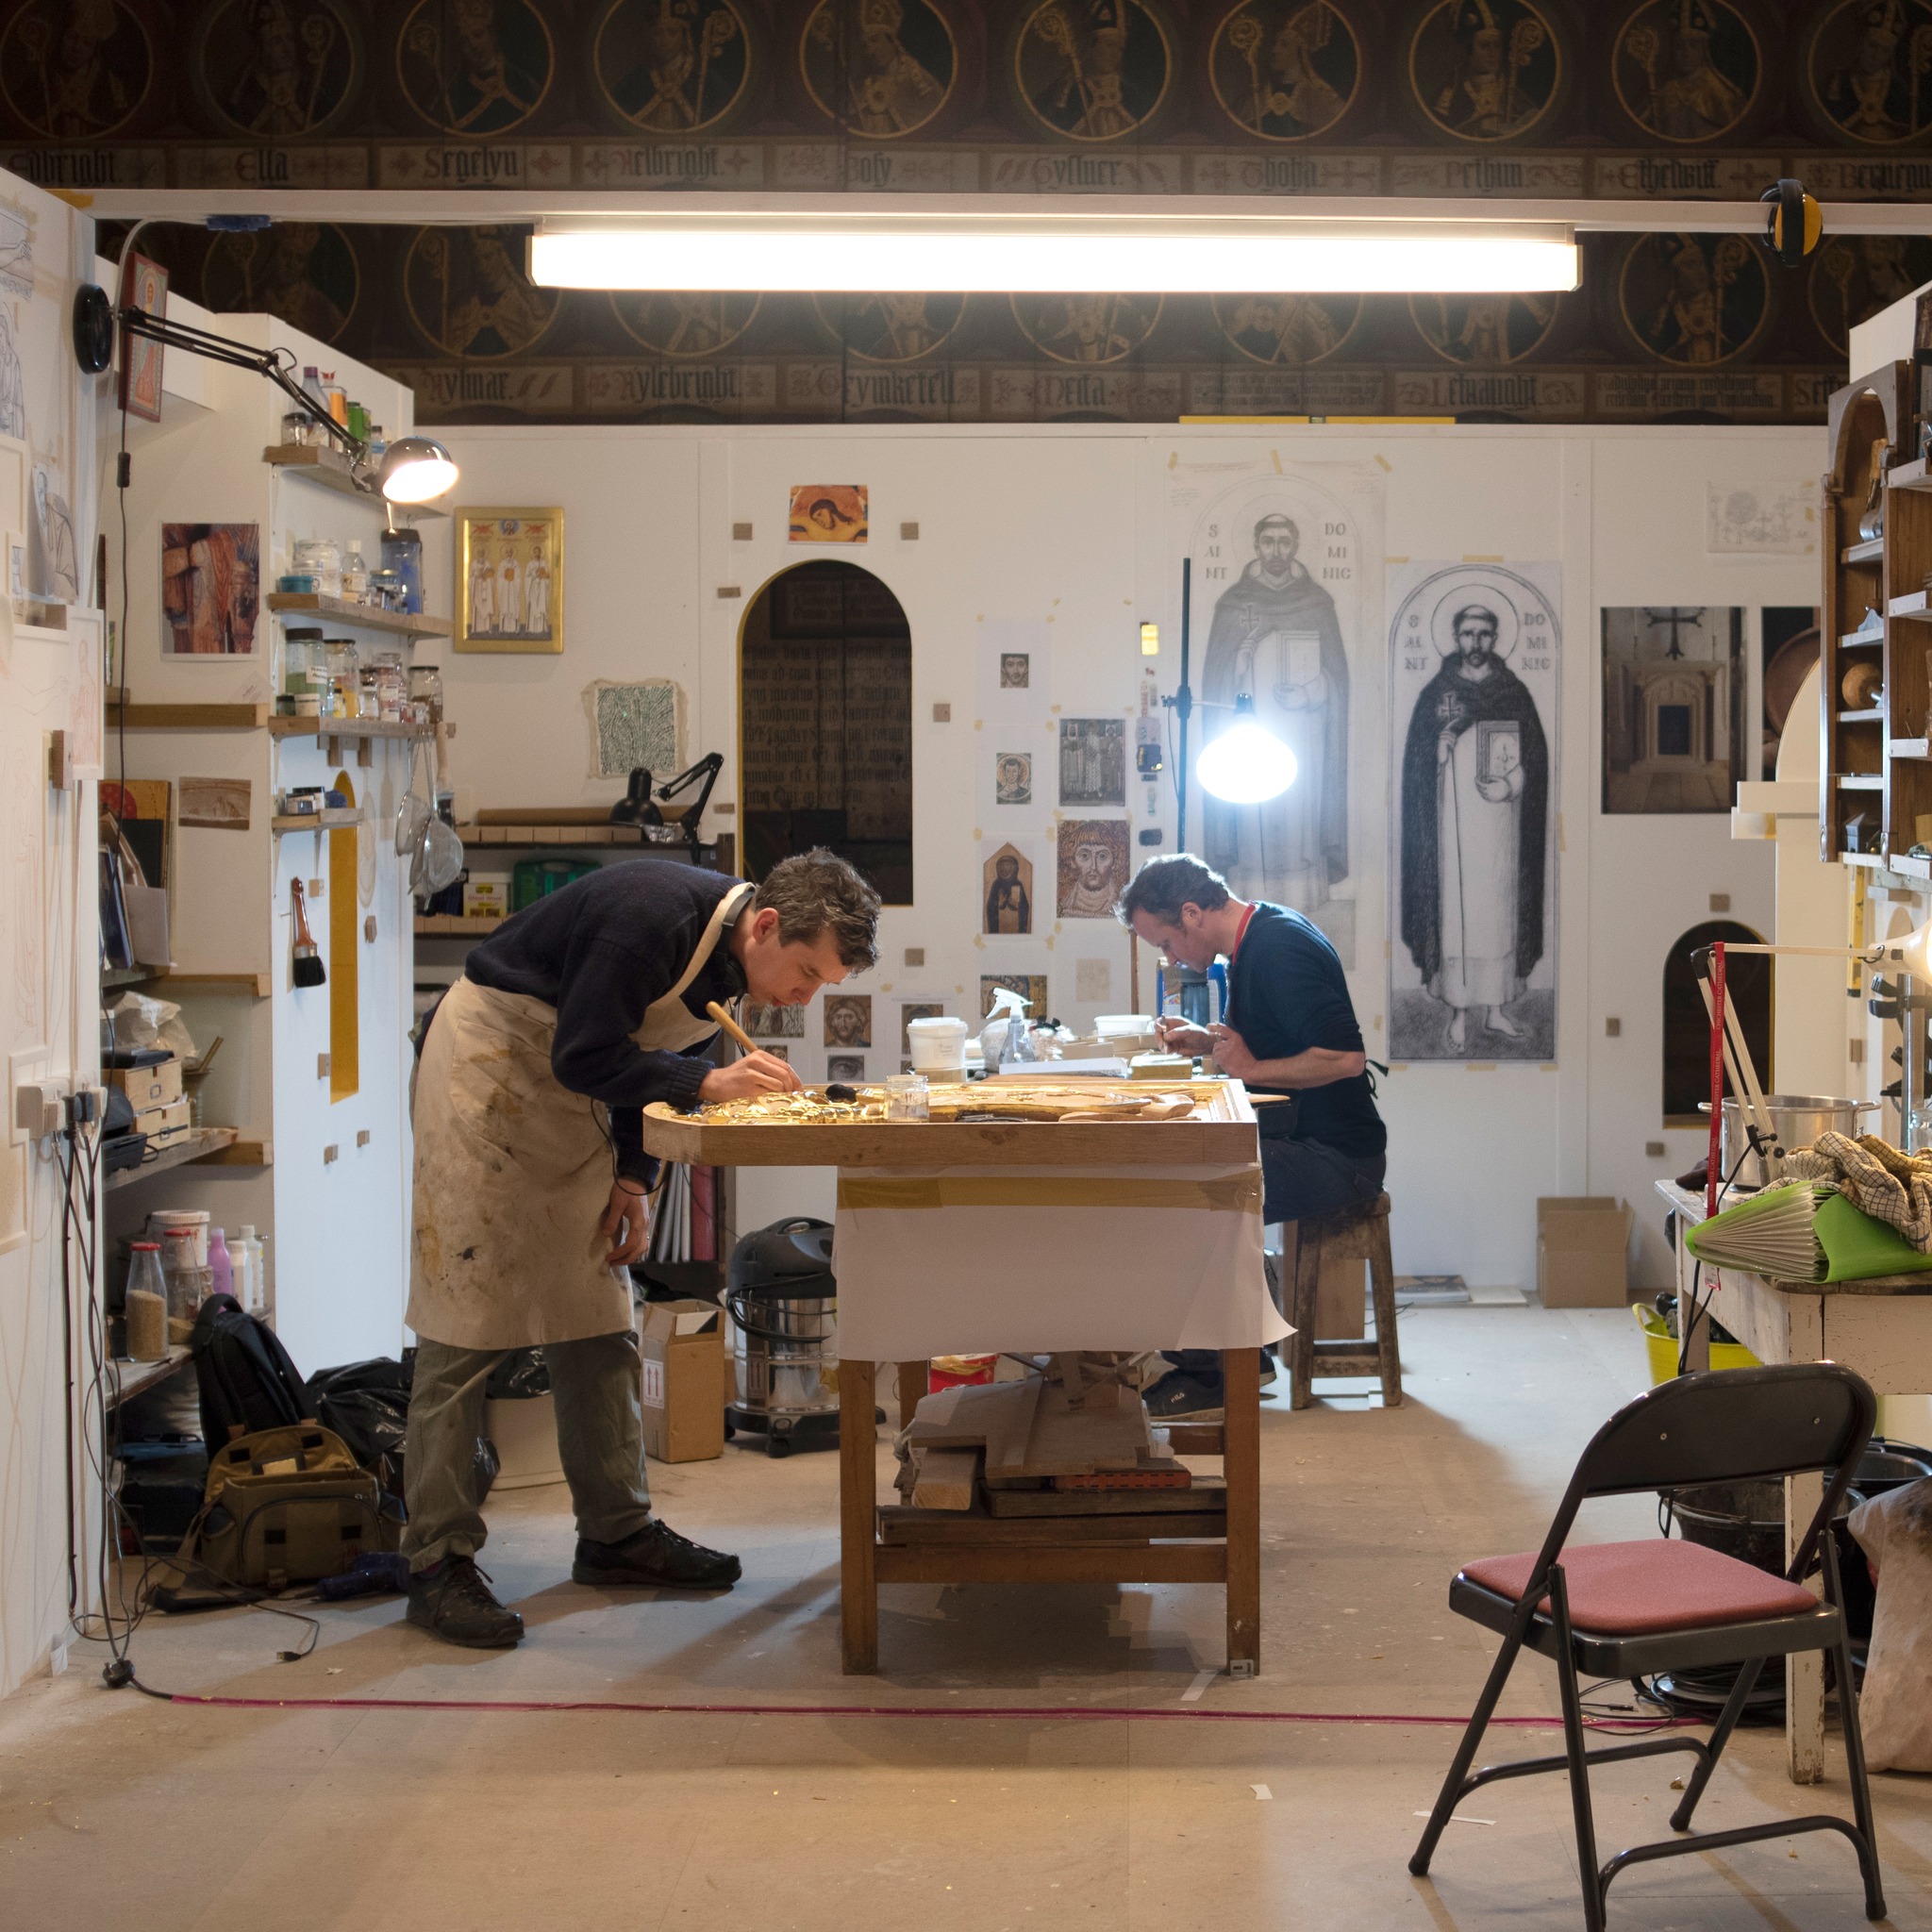 James Blackstone and Martin Earle working in the temporary studio in the North Transept